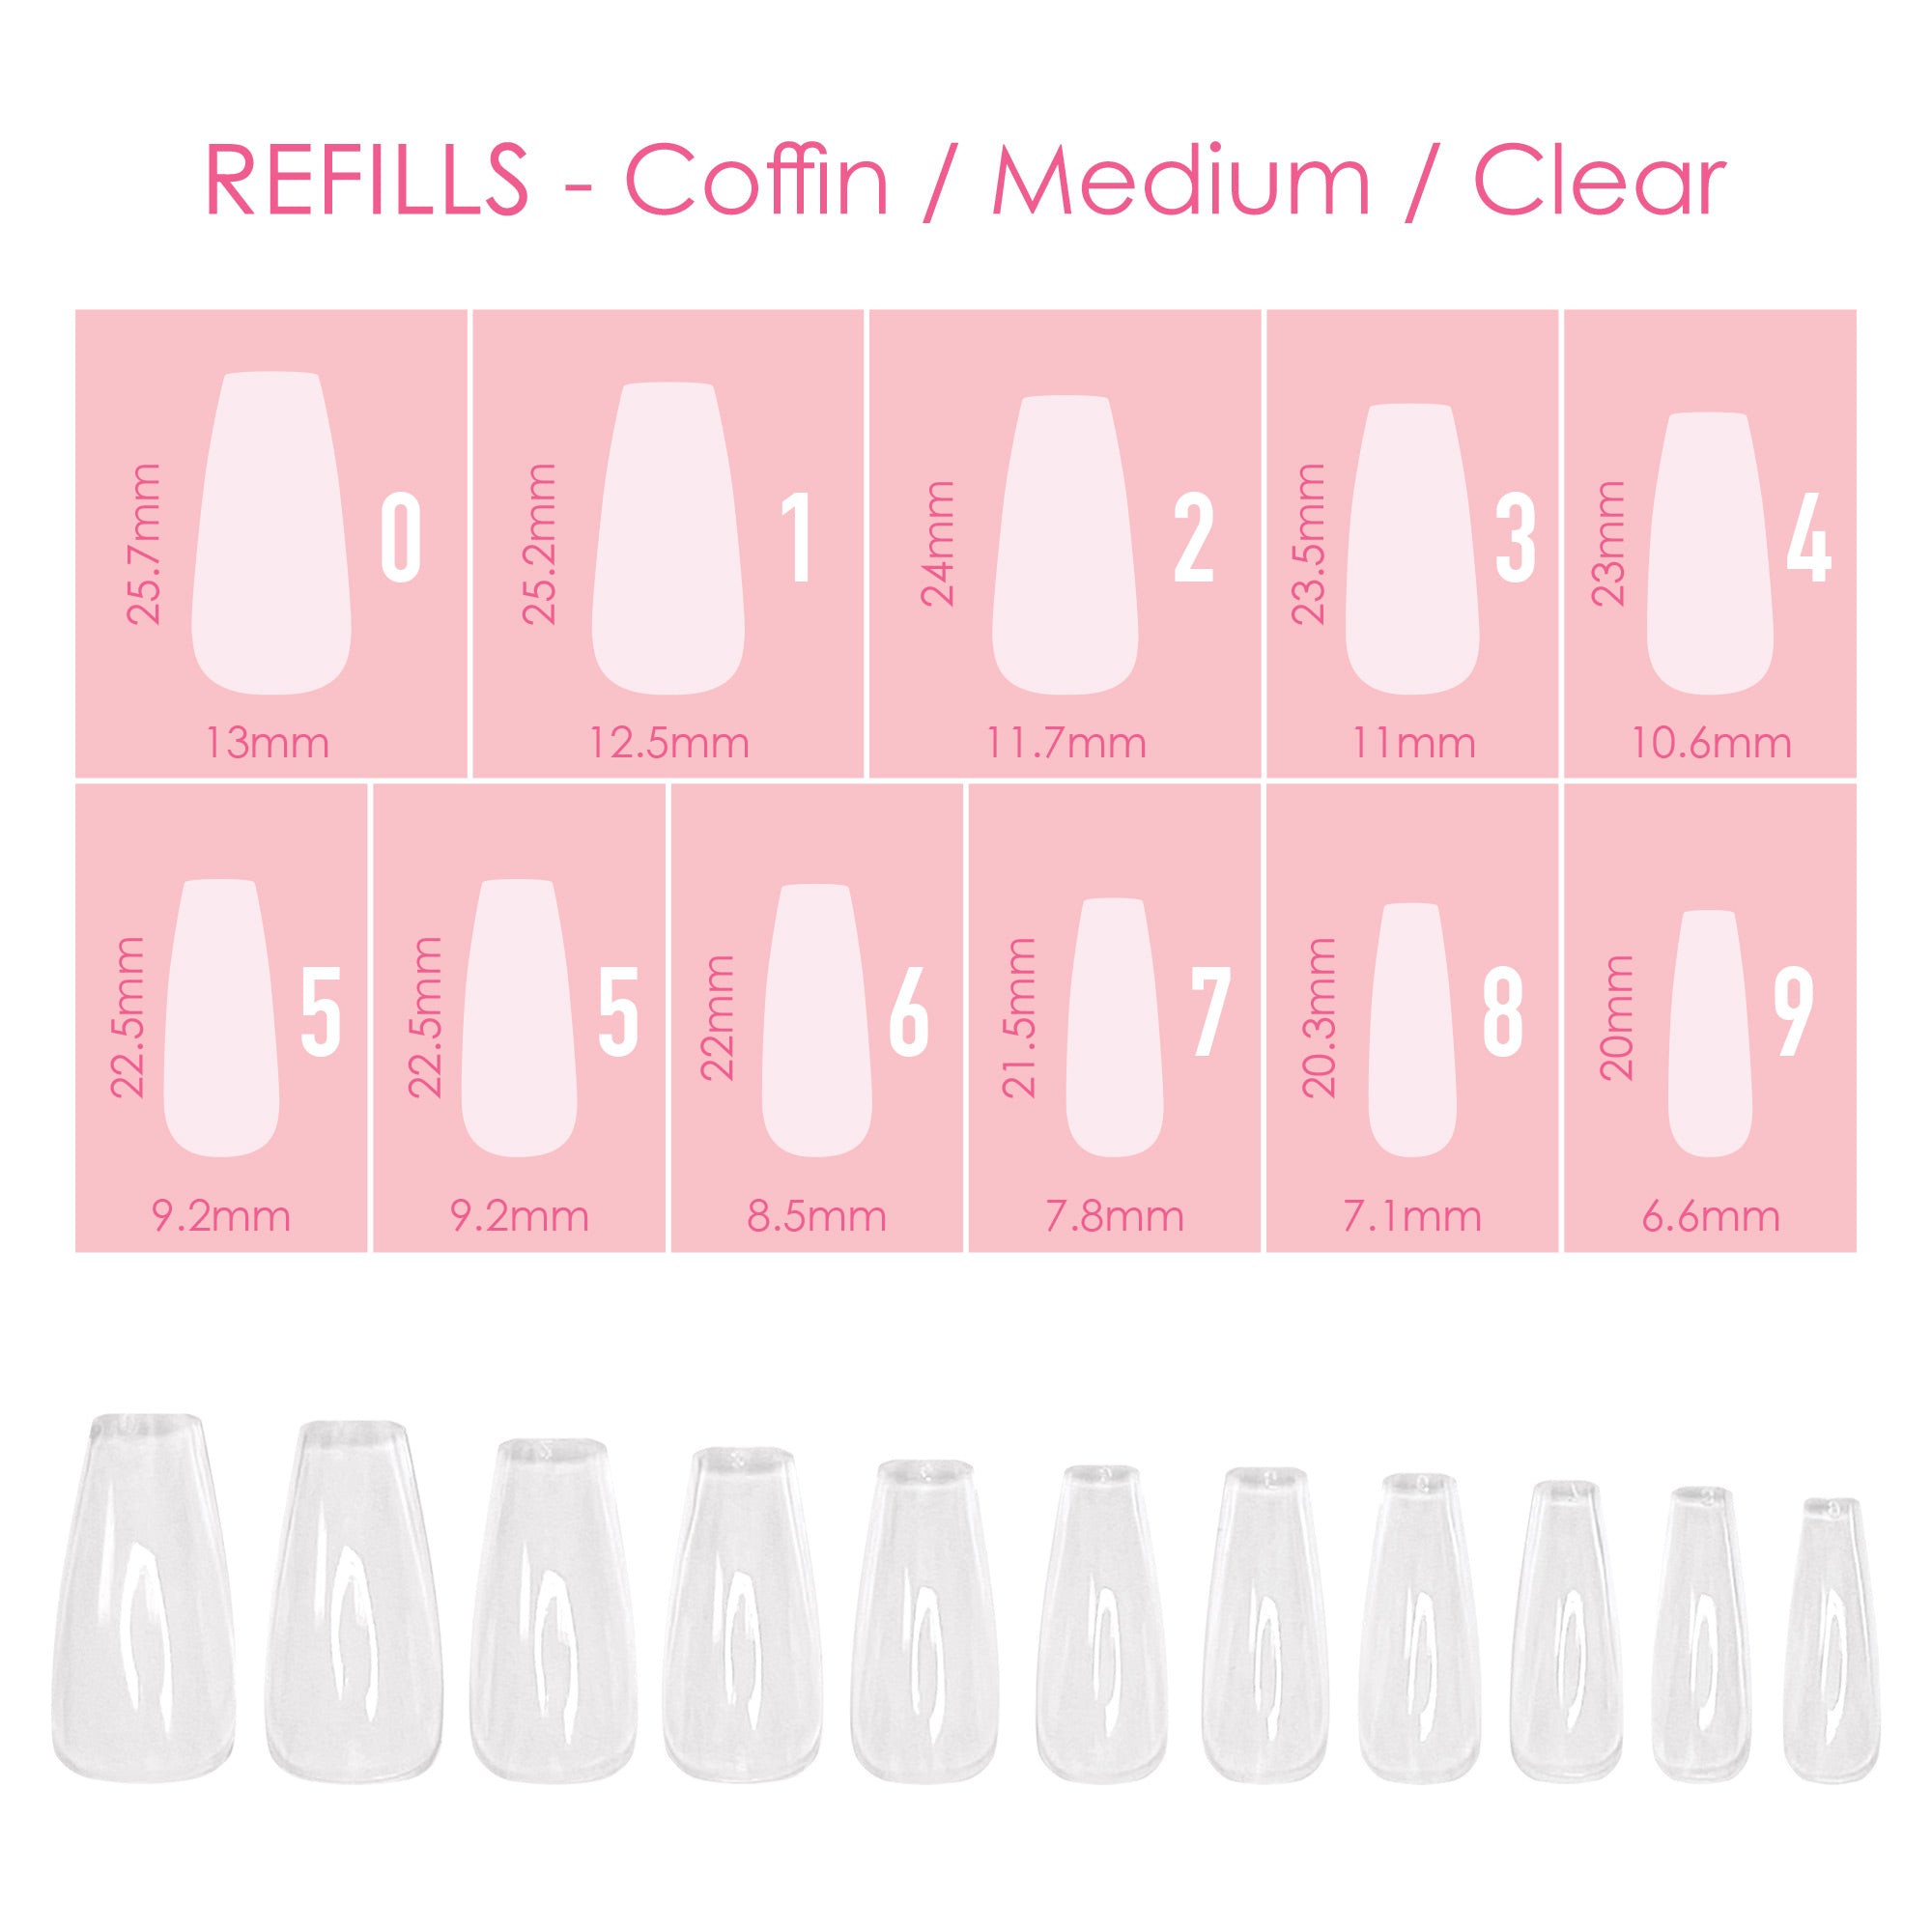 Acrylic or gel: Which nail extension should be your pick?